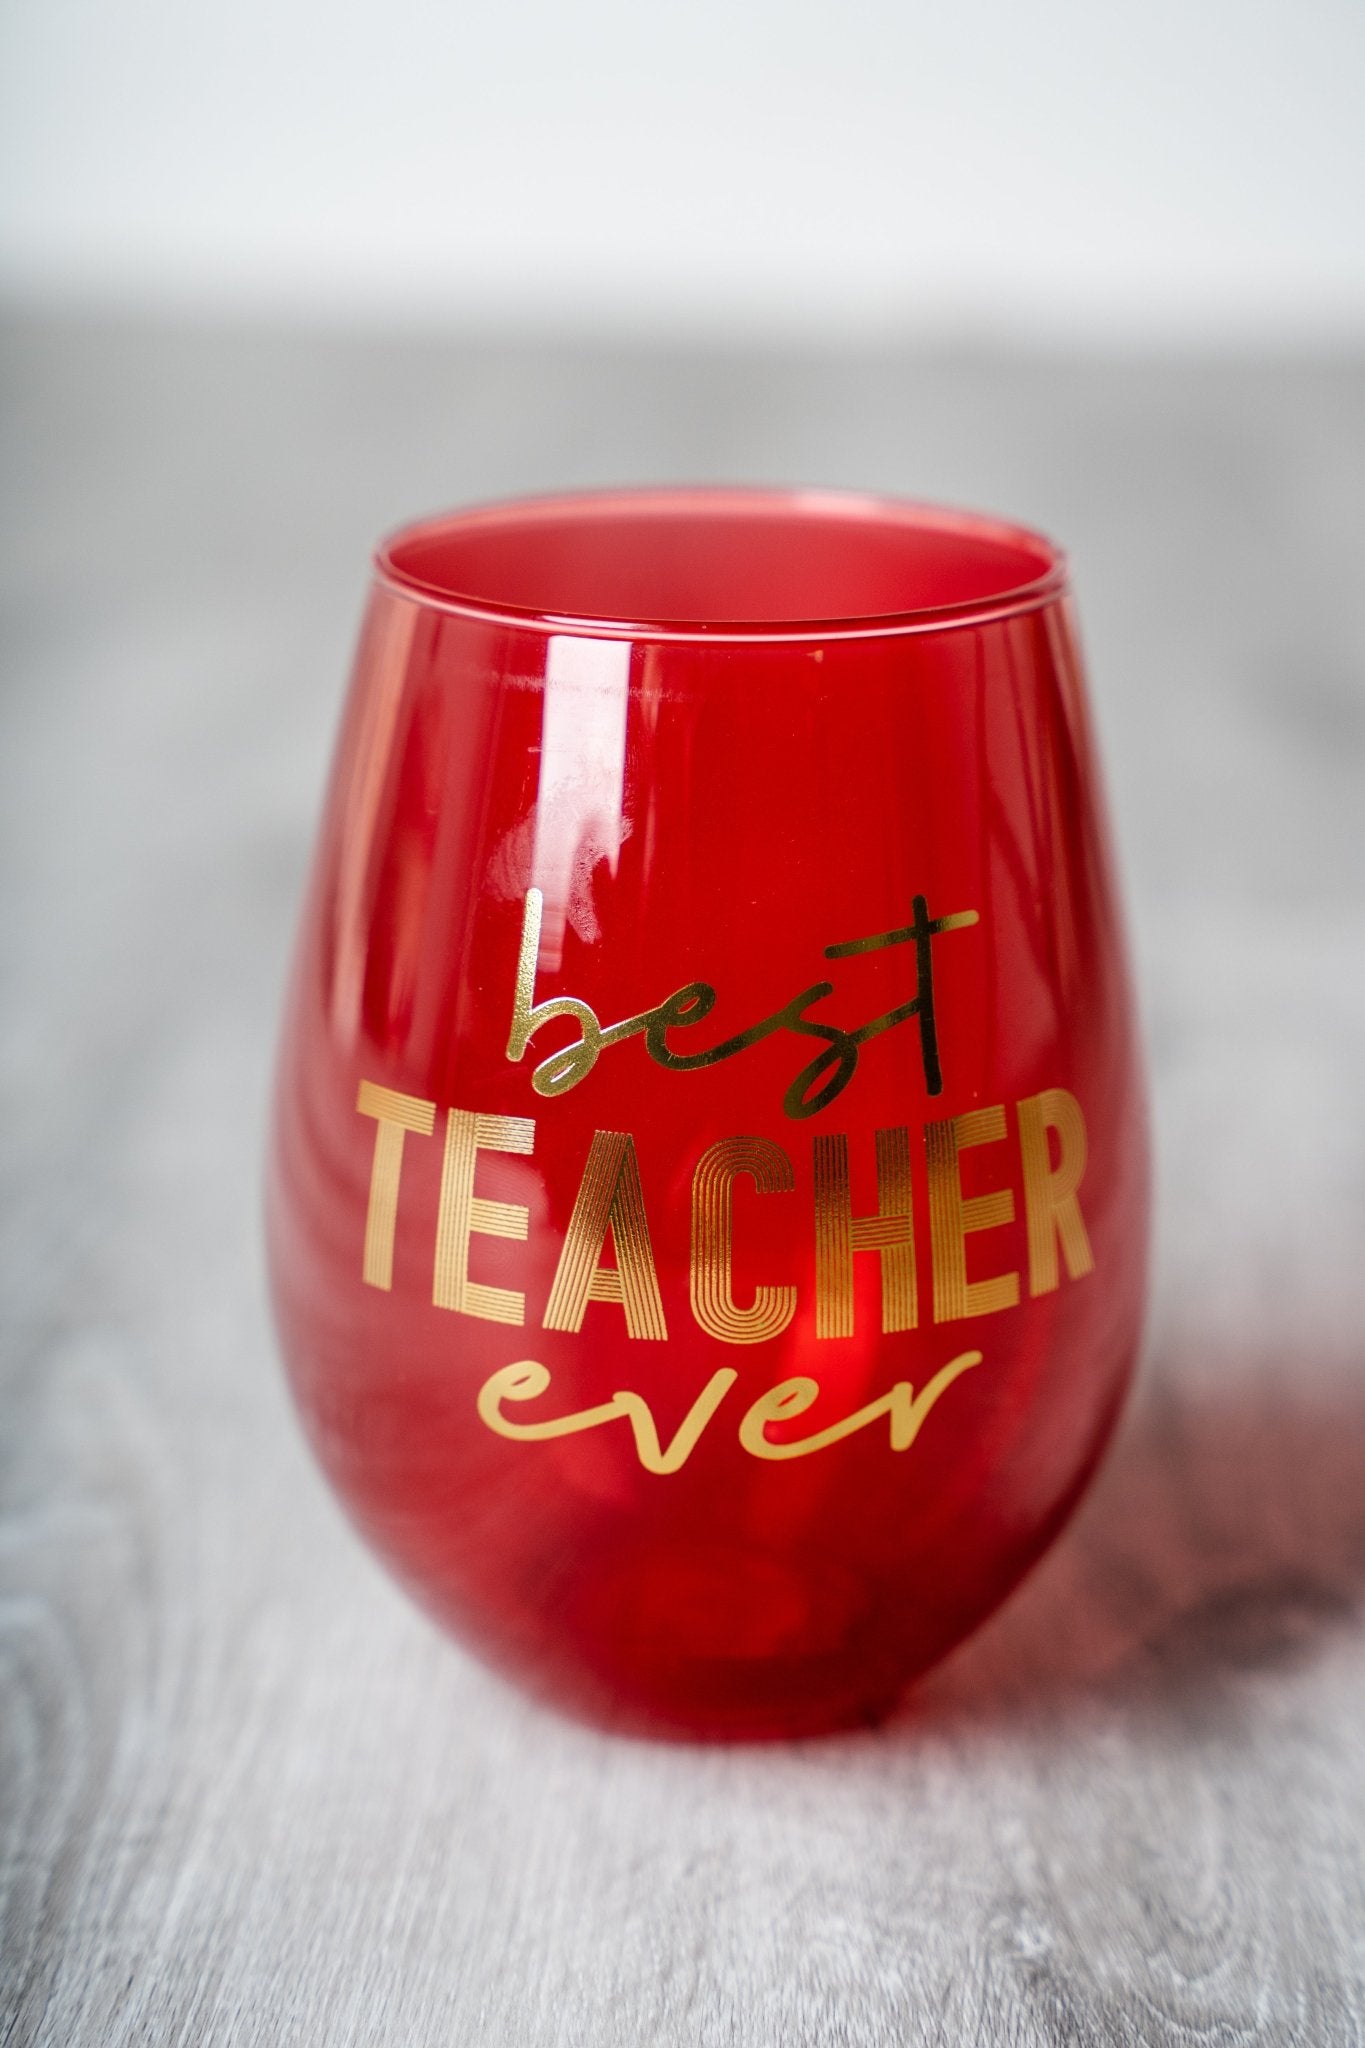 Best teacher ever jumbo wine glass - Trendy Tumblers, Mugs and Cups at Lush Fashion Lounge Boutique in Oklahoma City